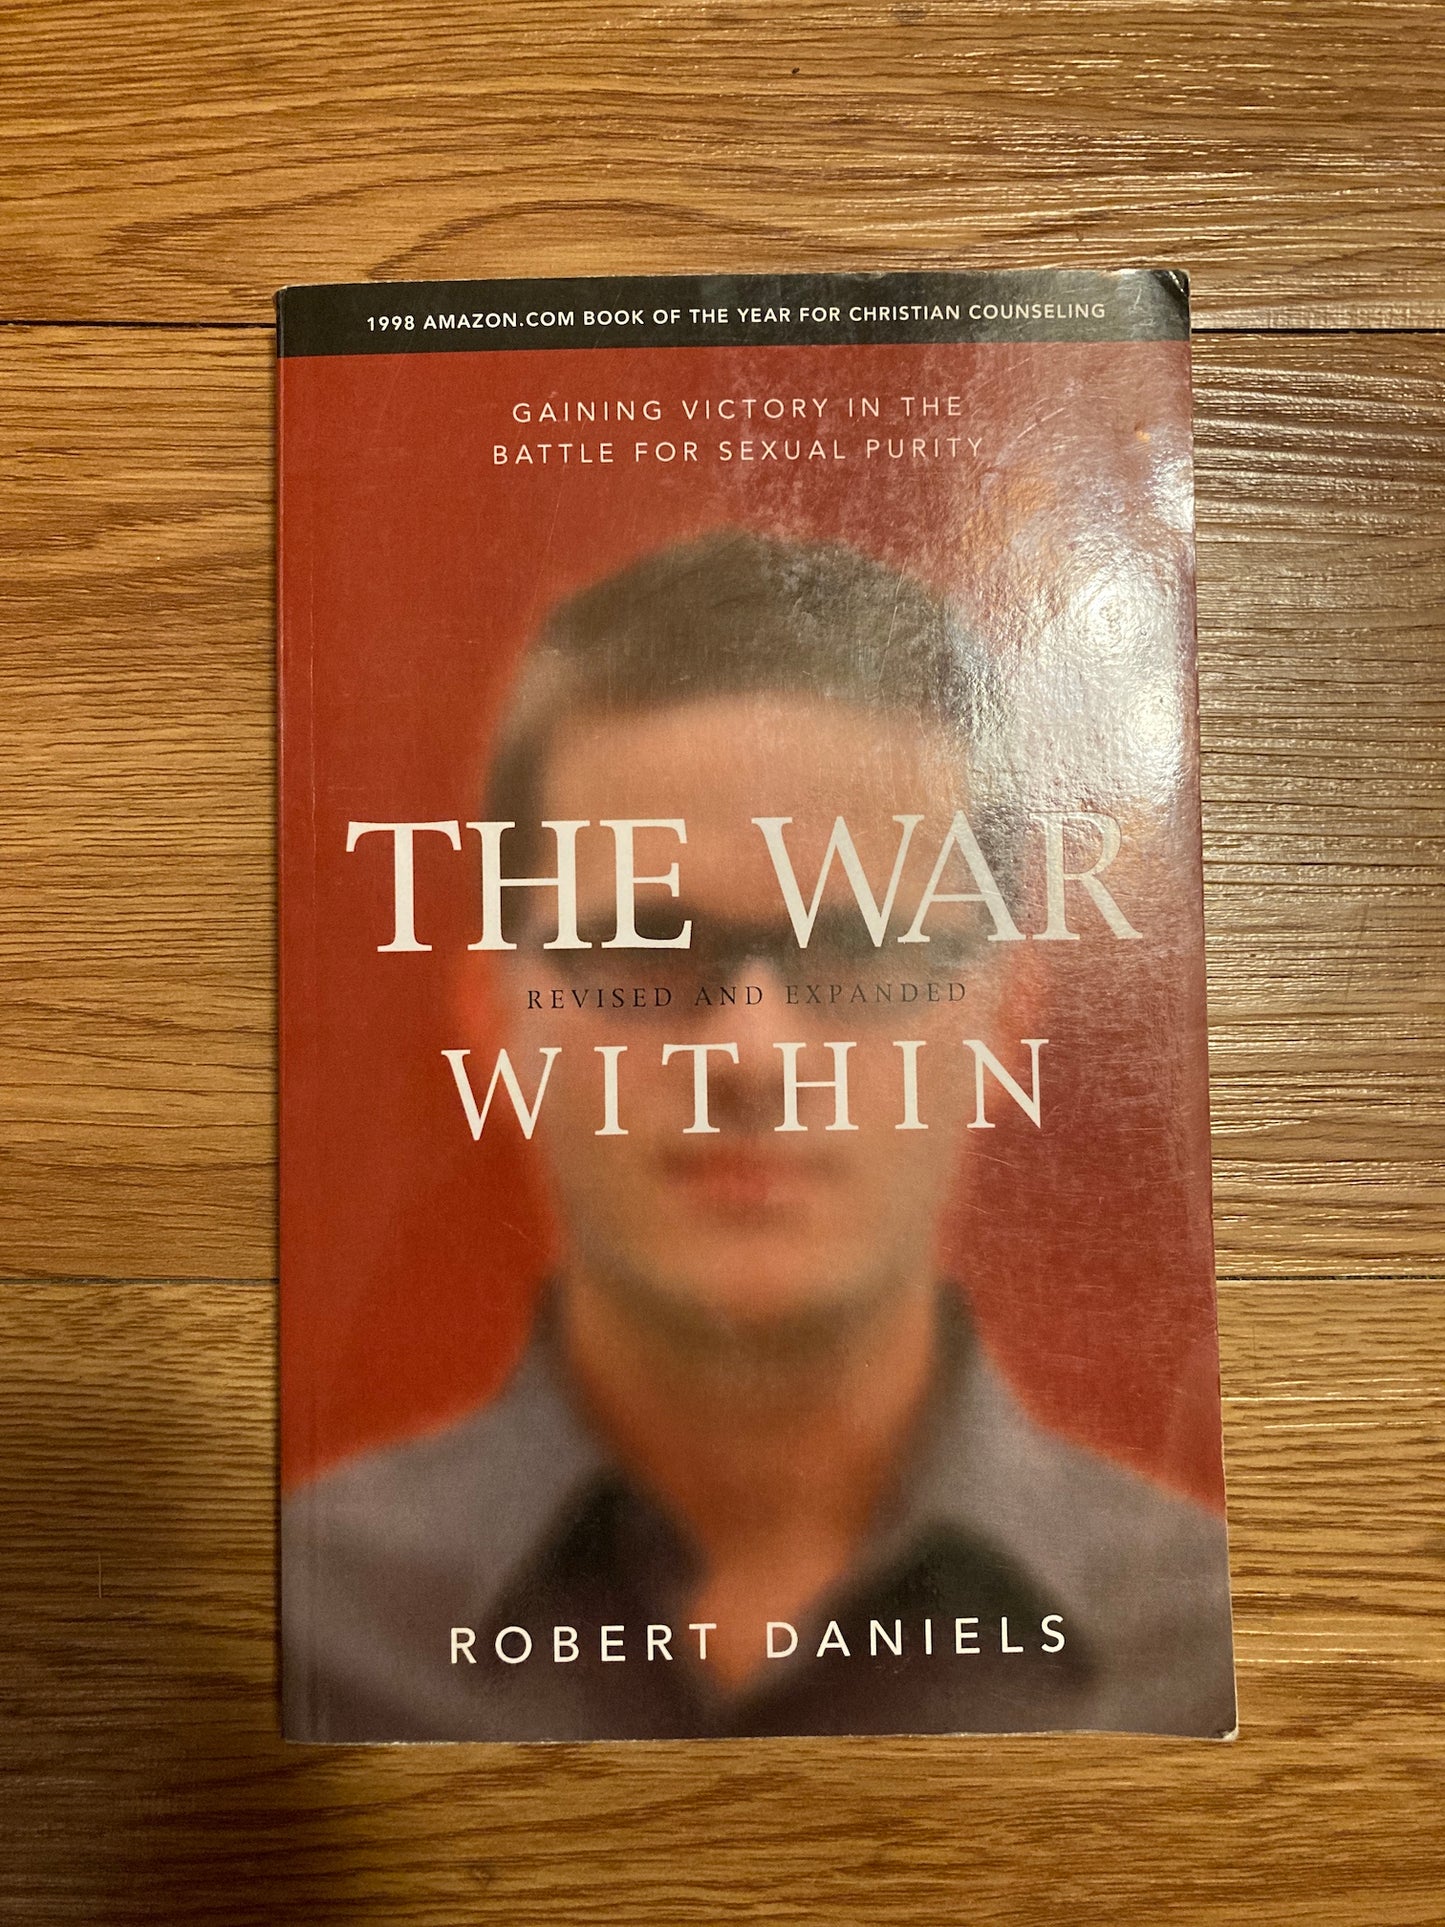 The War Within (Revised and Expanded Edition): Gaining Victory